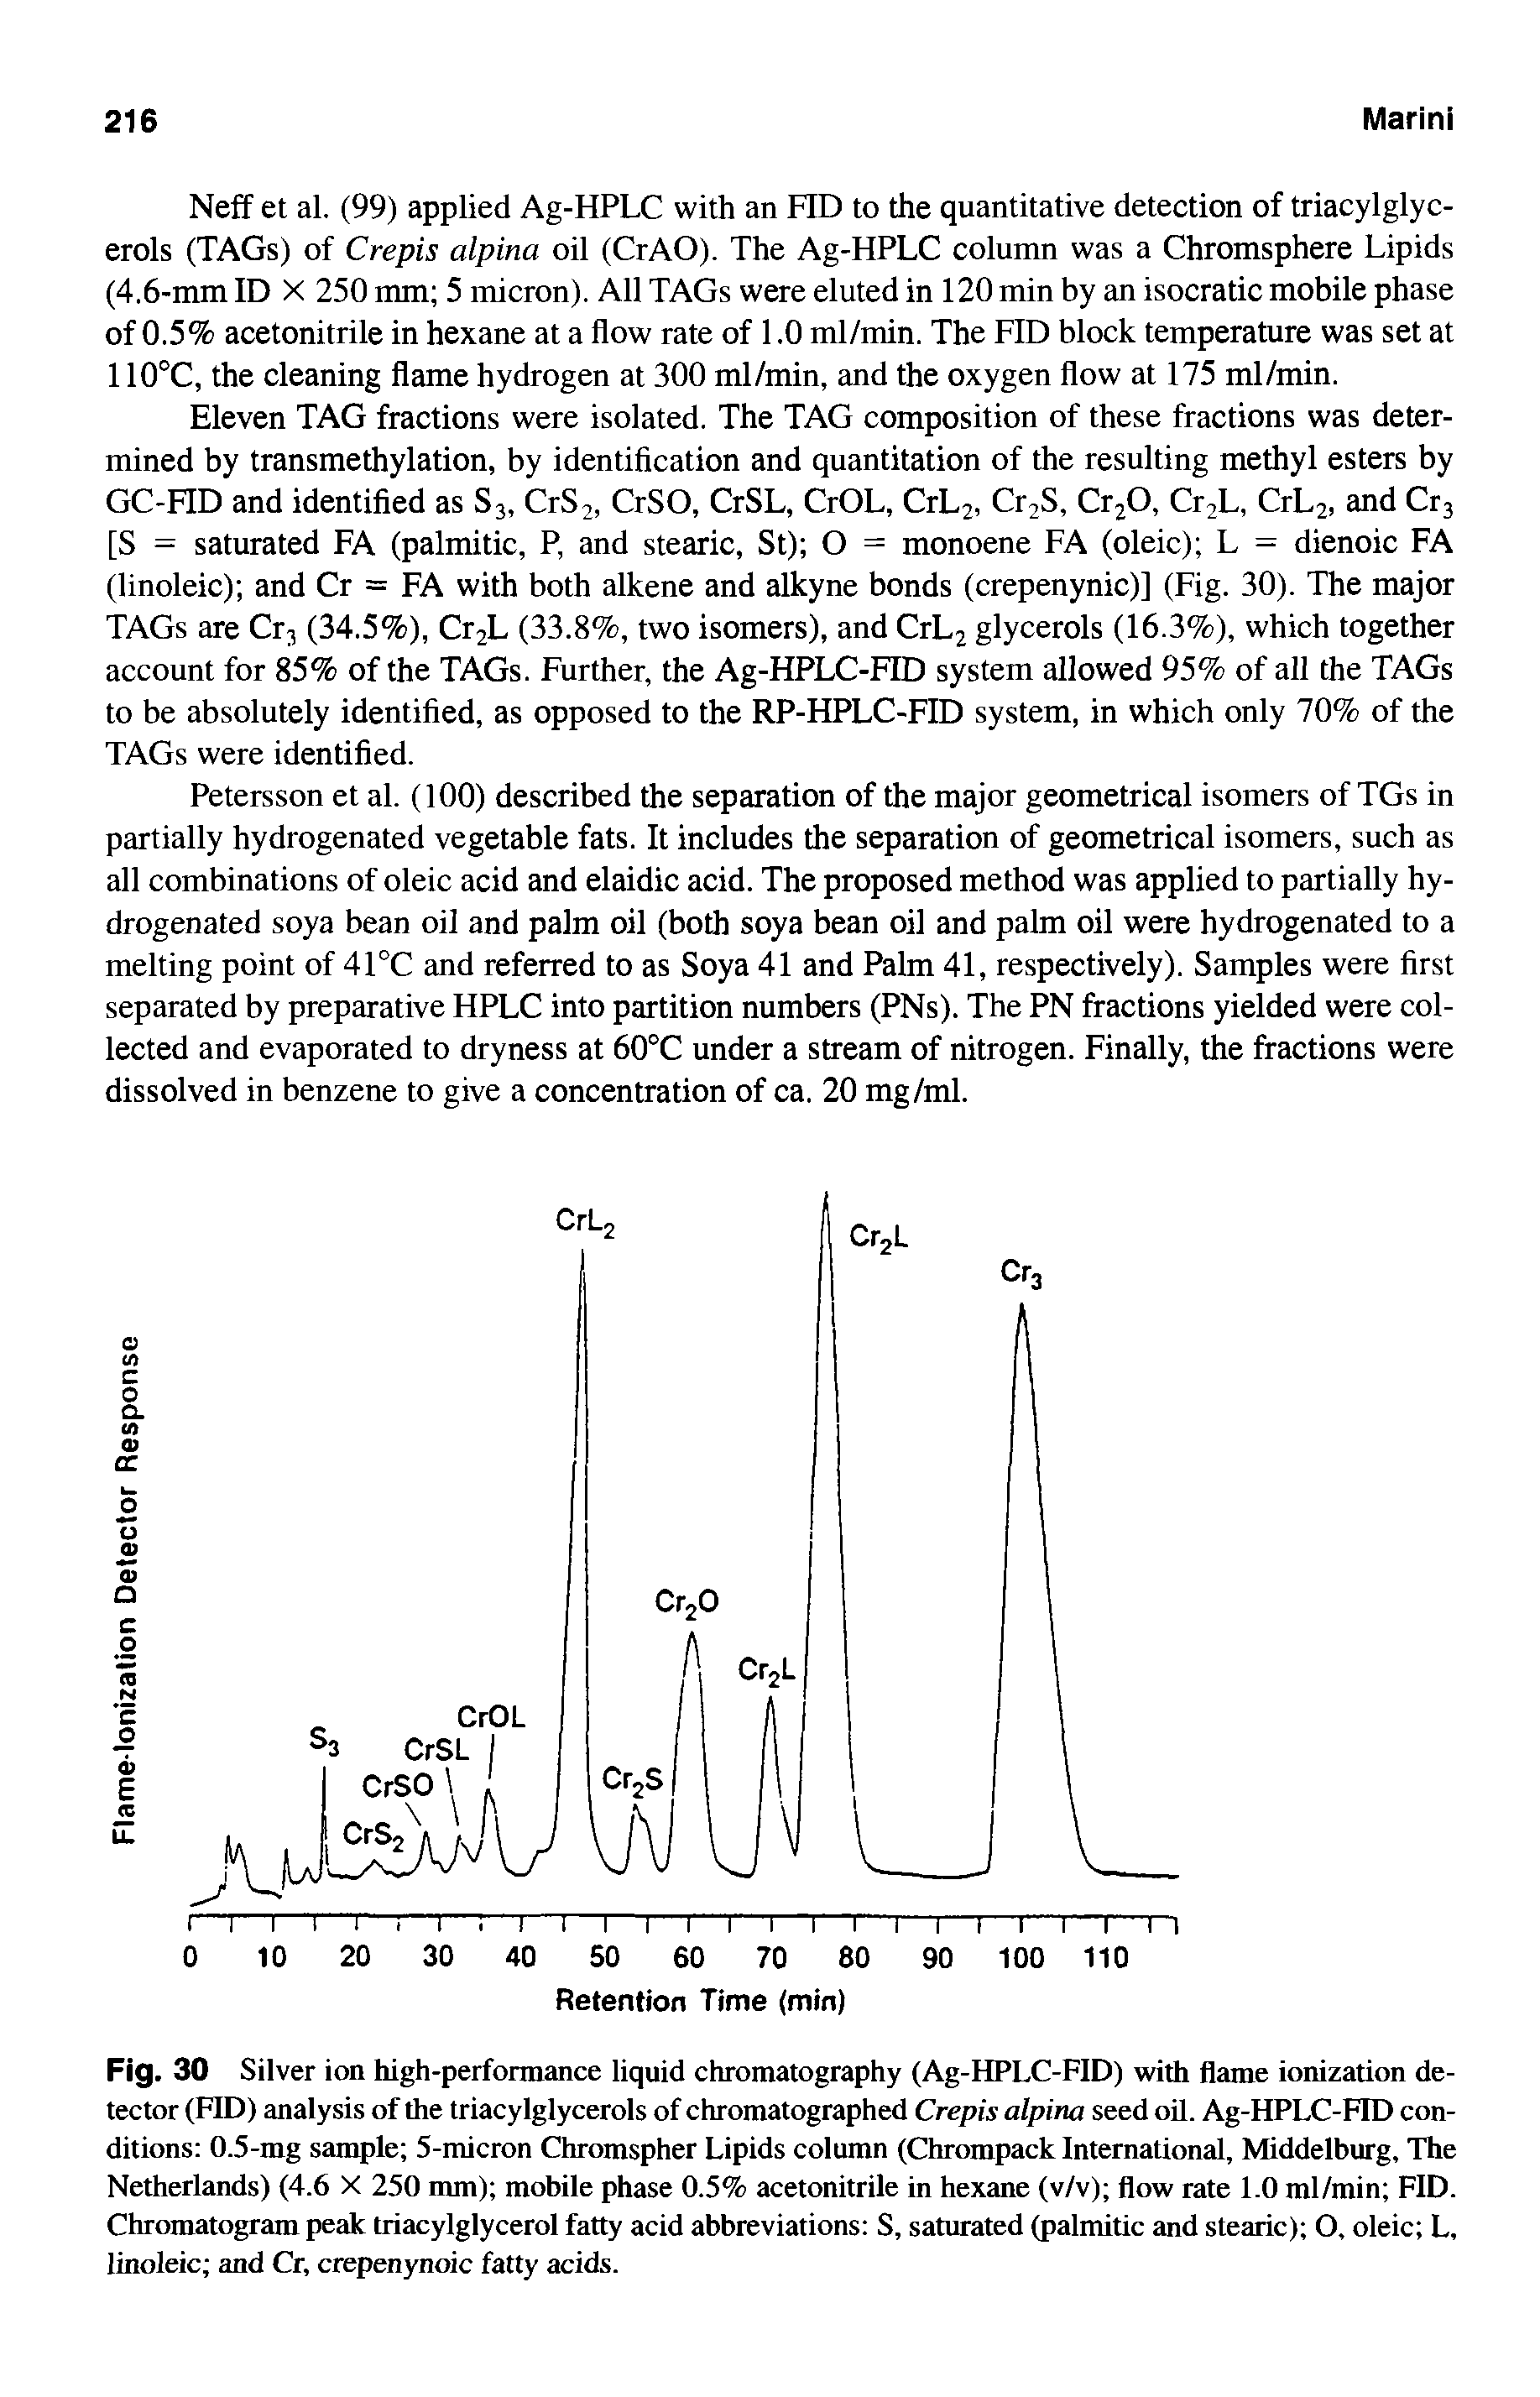 Fig. 30 Silver ion high-performance liquid chromatography (Ag-HPLC-FID) with flame ionization detector (FID) analysis of the triacylglycerols of chromatographed Crepis alpina seed oil. Ag-HPLC-FID conditions 0.5-mg sample 5-micron Chromspher Lipids column (Chrompack International, Middelburg, The Netherlands) (4.6 X 250 mm) mobile phase 0.5% acetonitrile in hexane (v/v) flow rate 1.0 ml/min FID. Chromatogram peak triacylglycerol fatty acid abbreviations S, saturated (palmitic and stearic) O, oleic L, linoleic and Cr, crepenynoic fatty acids.